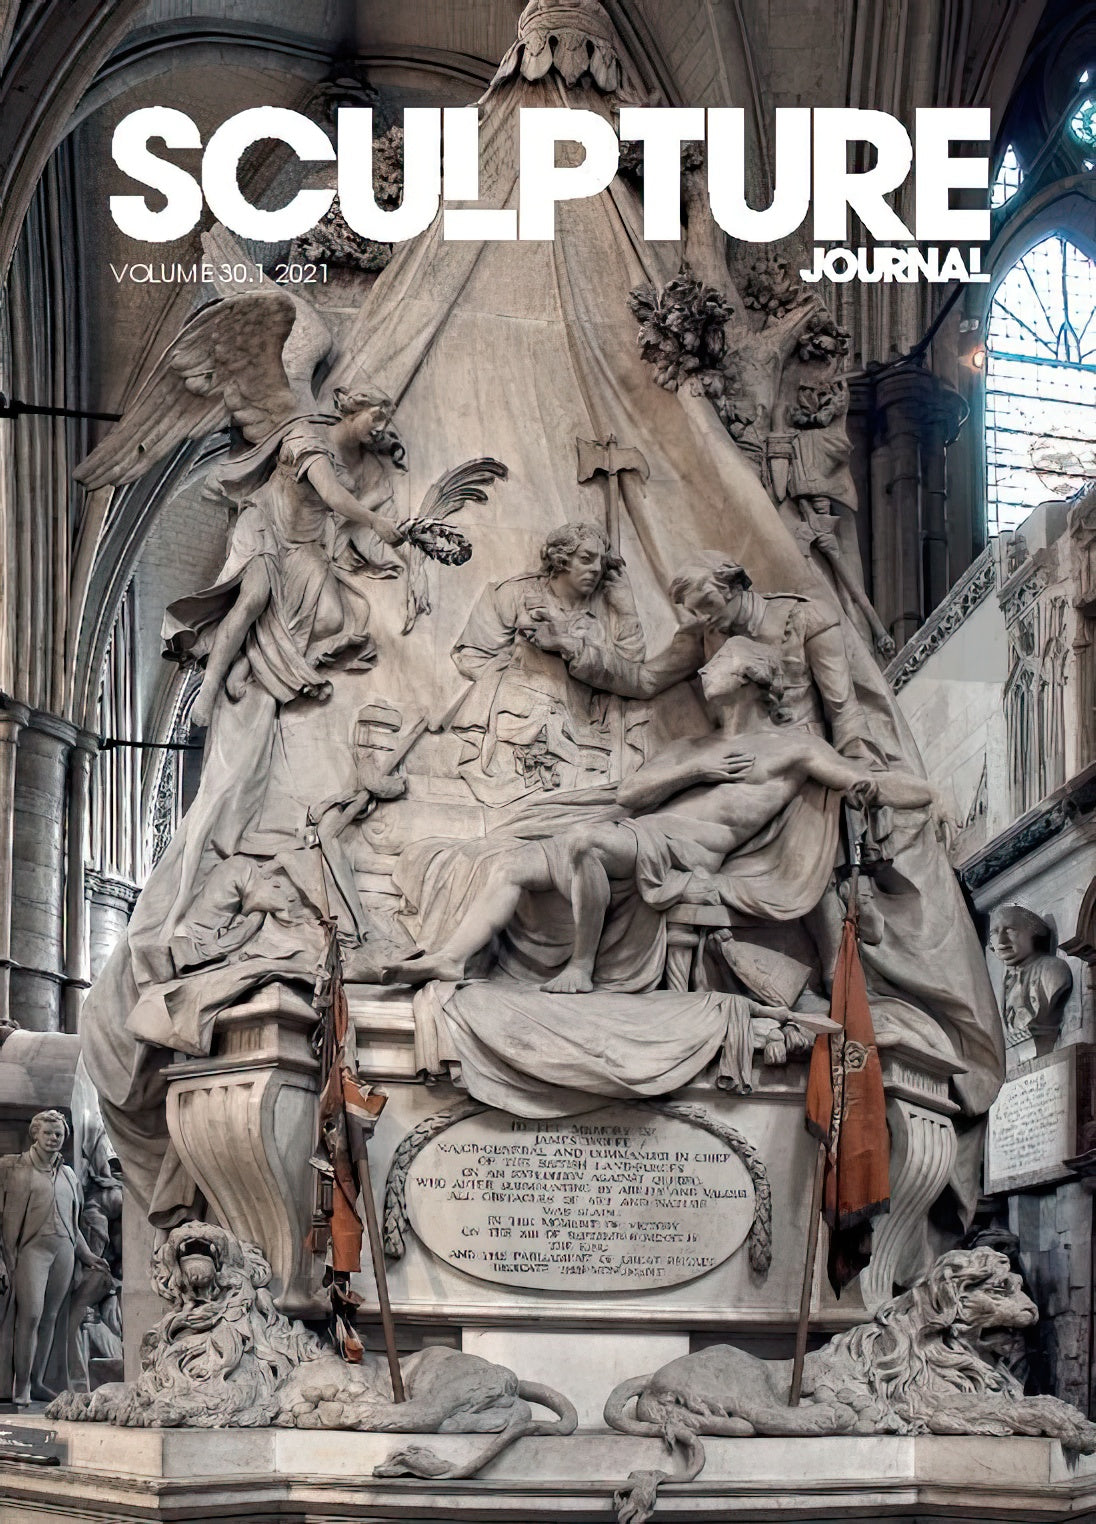 Noting the Passing of the Sculpture Journal